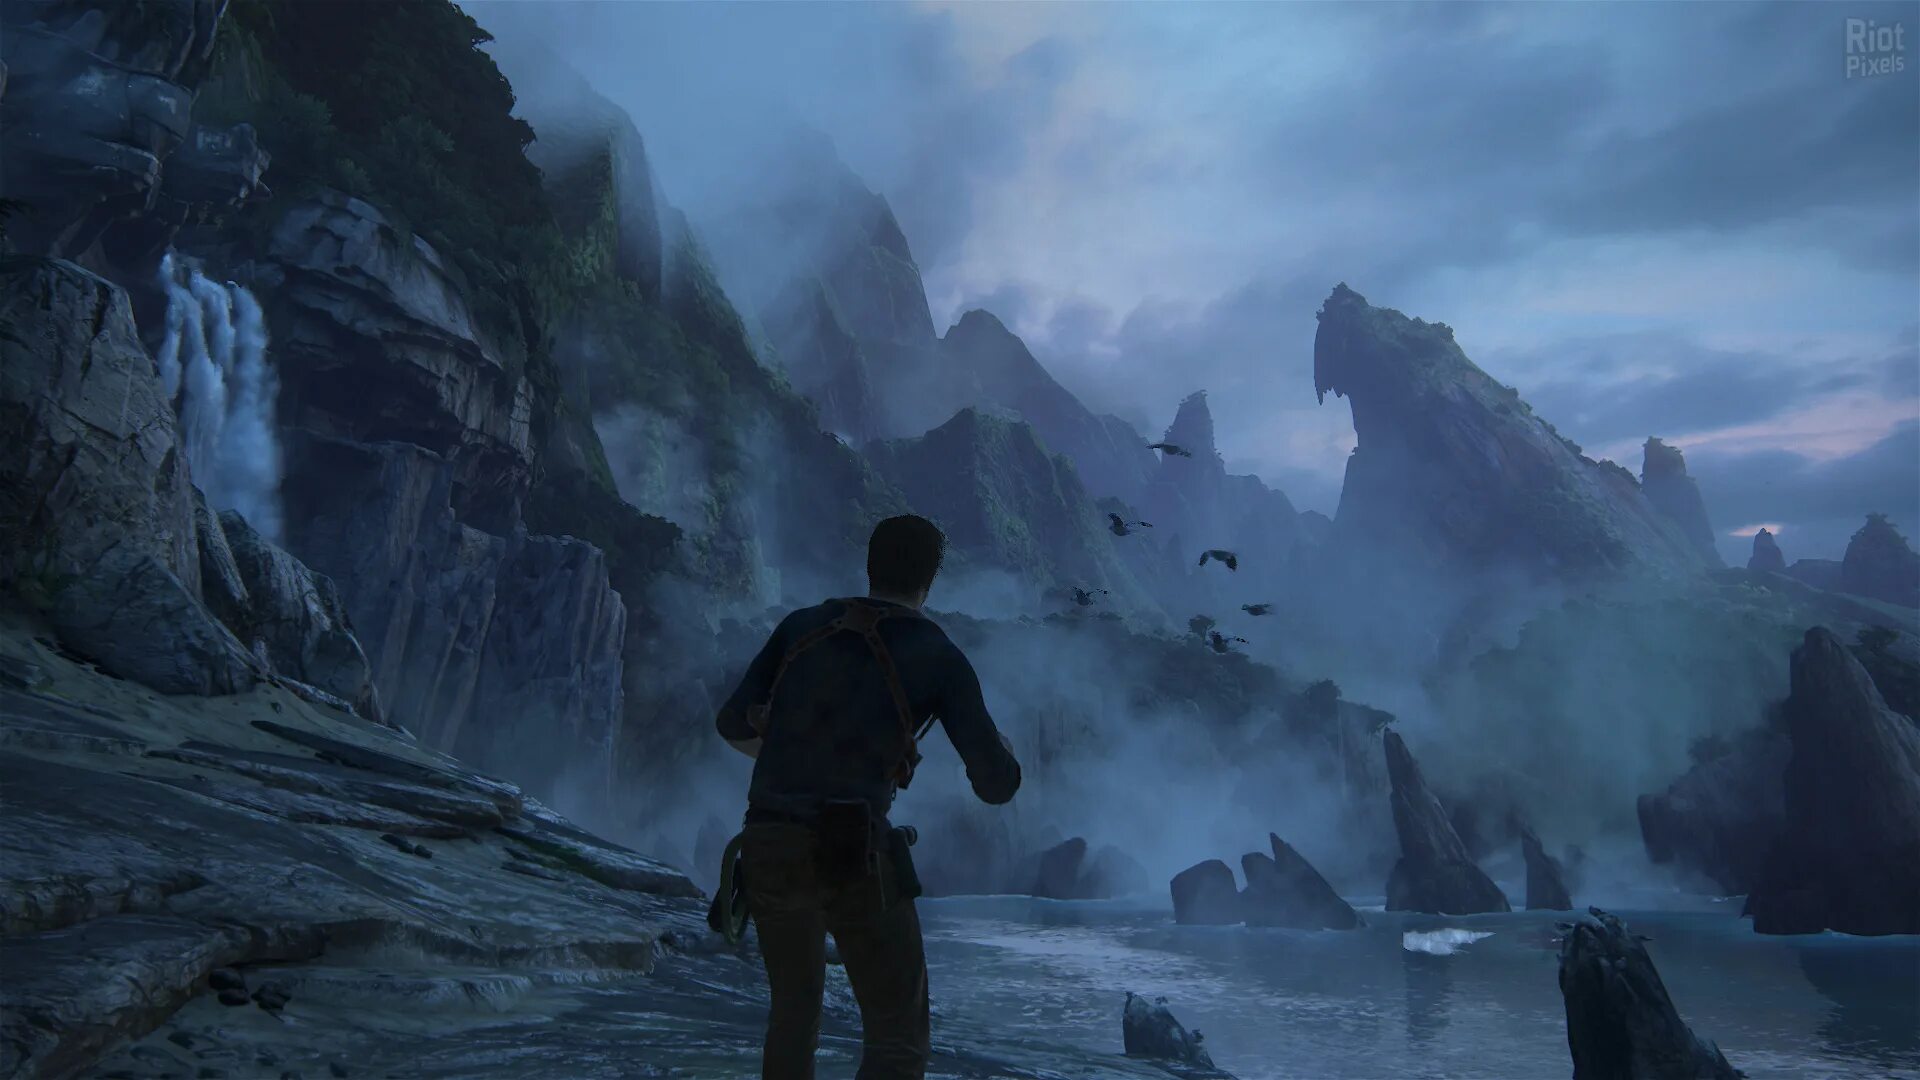 Анчартед 4. Uncharted 4: a Thief’s end. Анчартед 4 a Thief's end. Анчартед 4 путь вора.